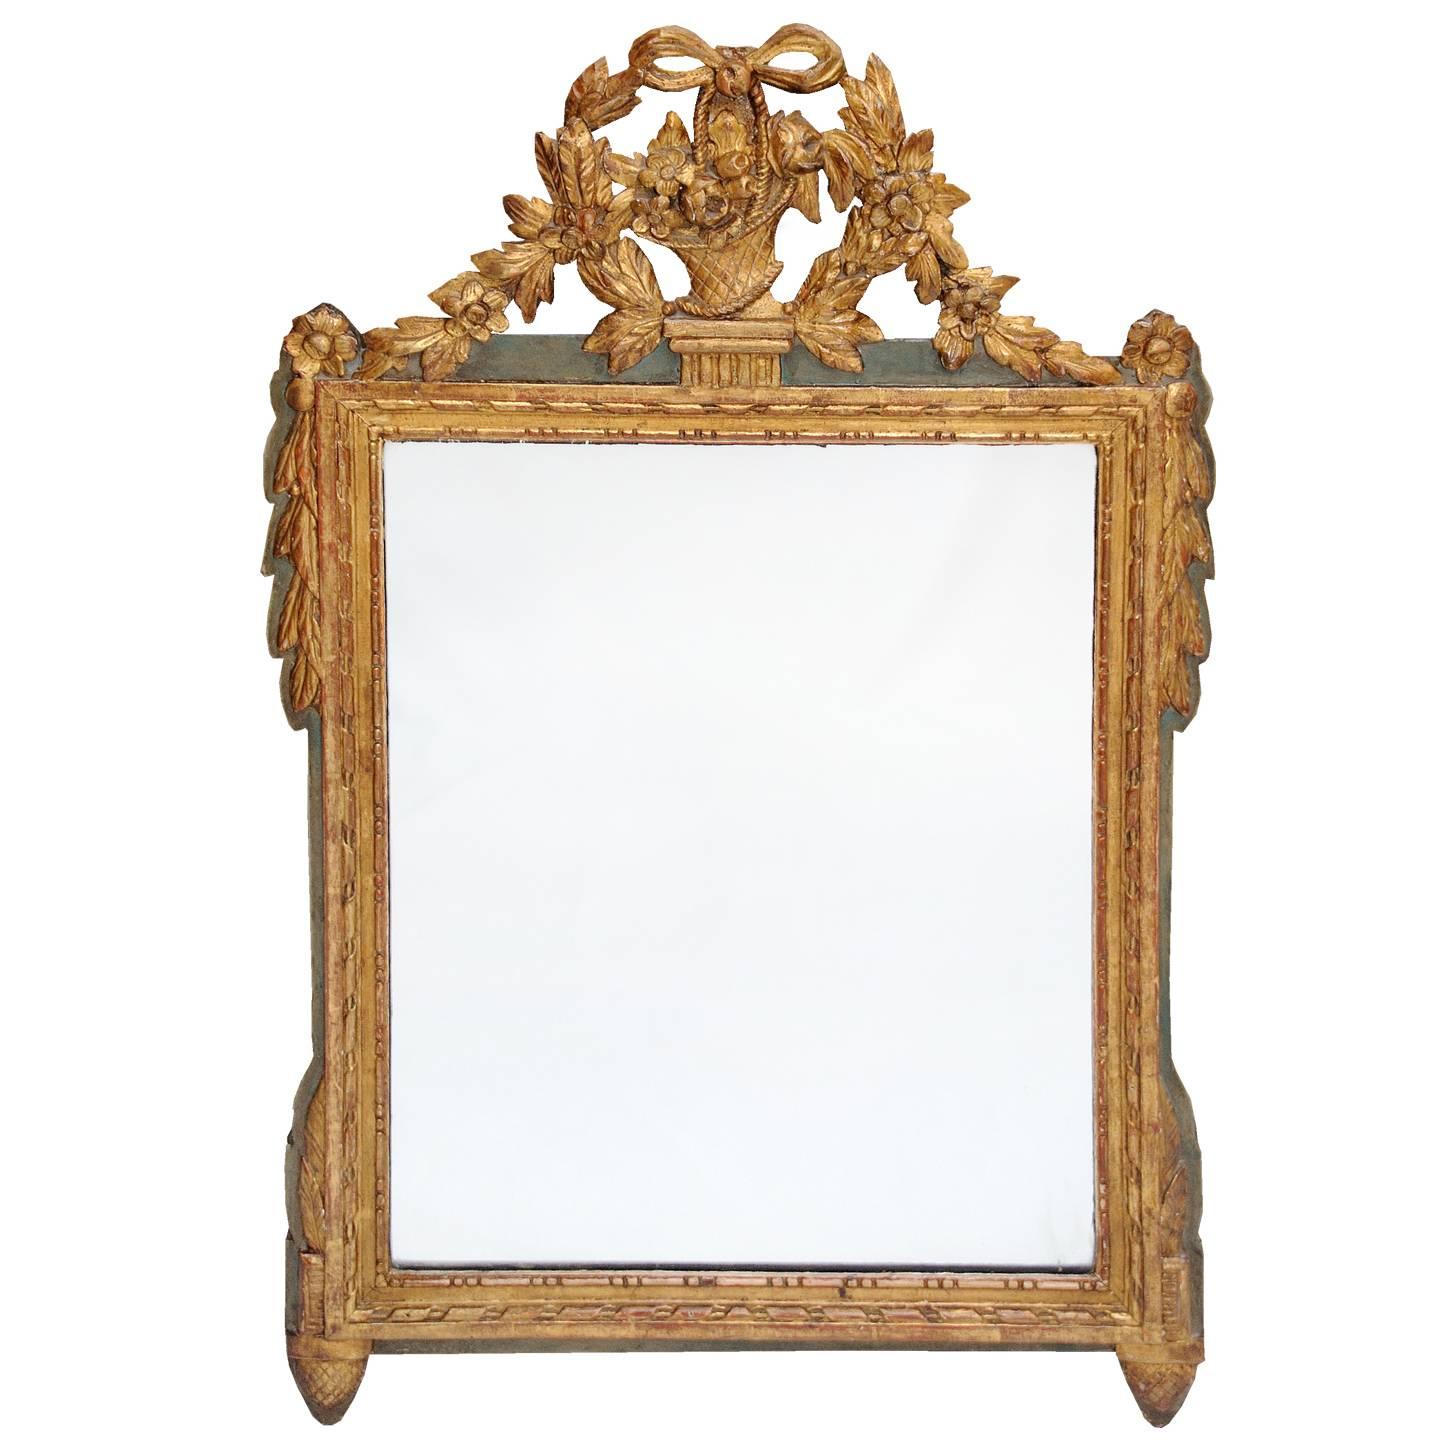 Northern French, Late 18th Century Painted and Giltwood Mirror, circa 1780 For Sale